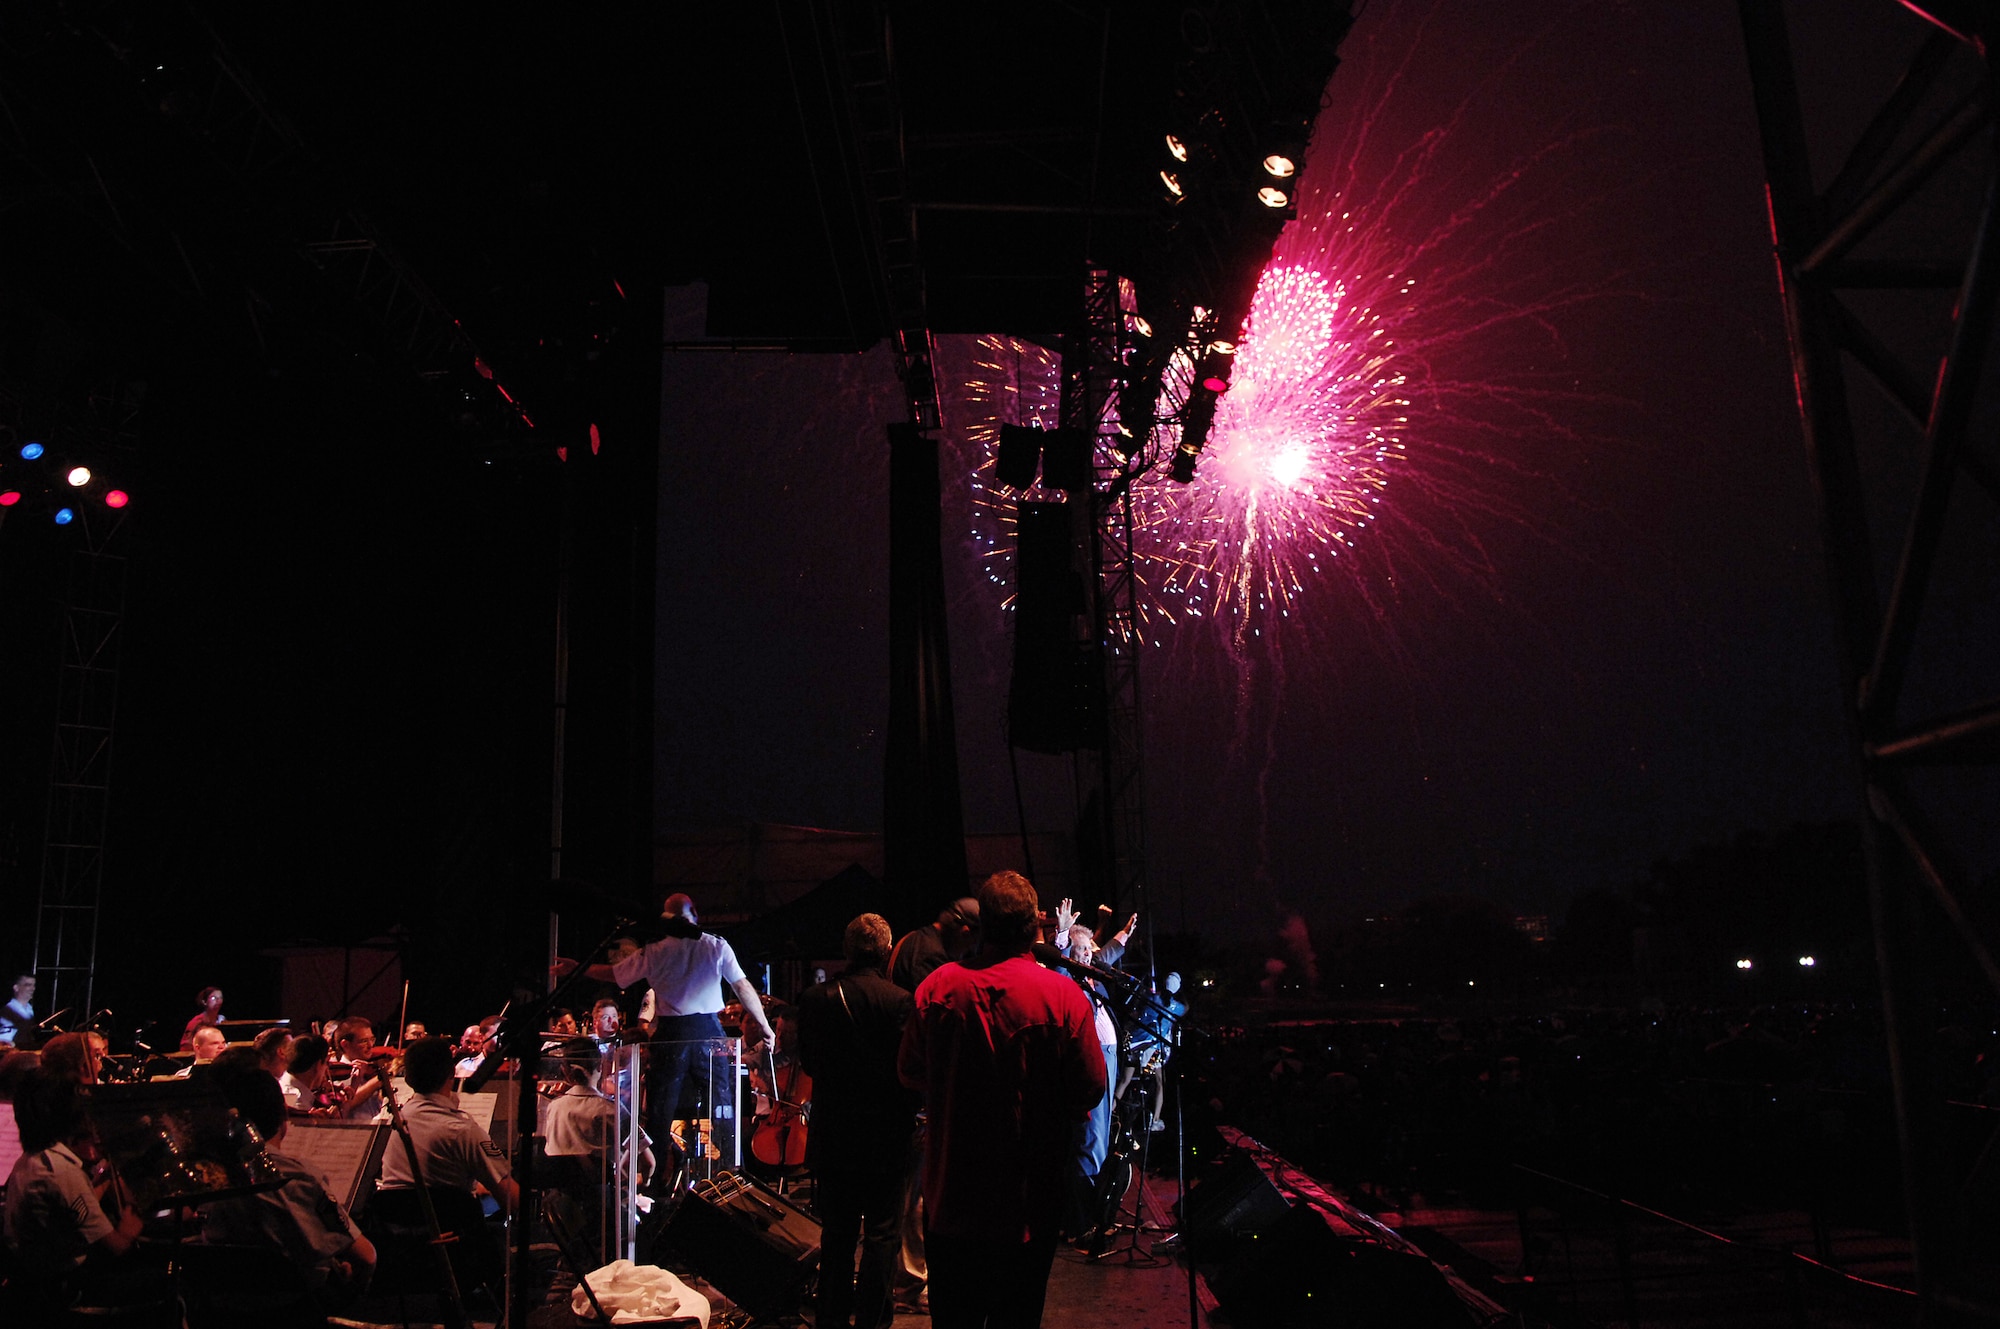 Larry Gatlin and the Gatlin Brothers along with the U.S. Air Force Band watch fireworks over the nation's capital July 4 after a concert at the Washington Monument. The Band presents a special concert open to the public at the base of the Washington Monument as part of the National Park Service's Independence Day Celebration. The program included the Concert Band, the Singing Sergeants, Max Impact and a special appearance by the Grammy Award-winning country artists Larry Gatlin and the Gatlin Brothers. (U.S. Air Force photo by Senior Airman Marleah Miller)